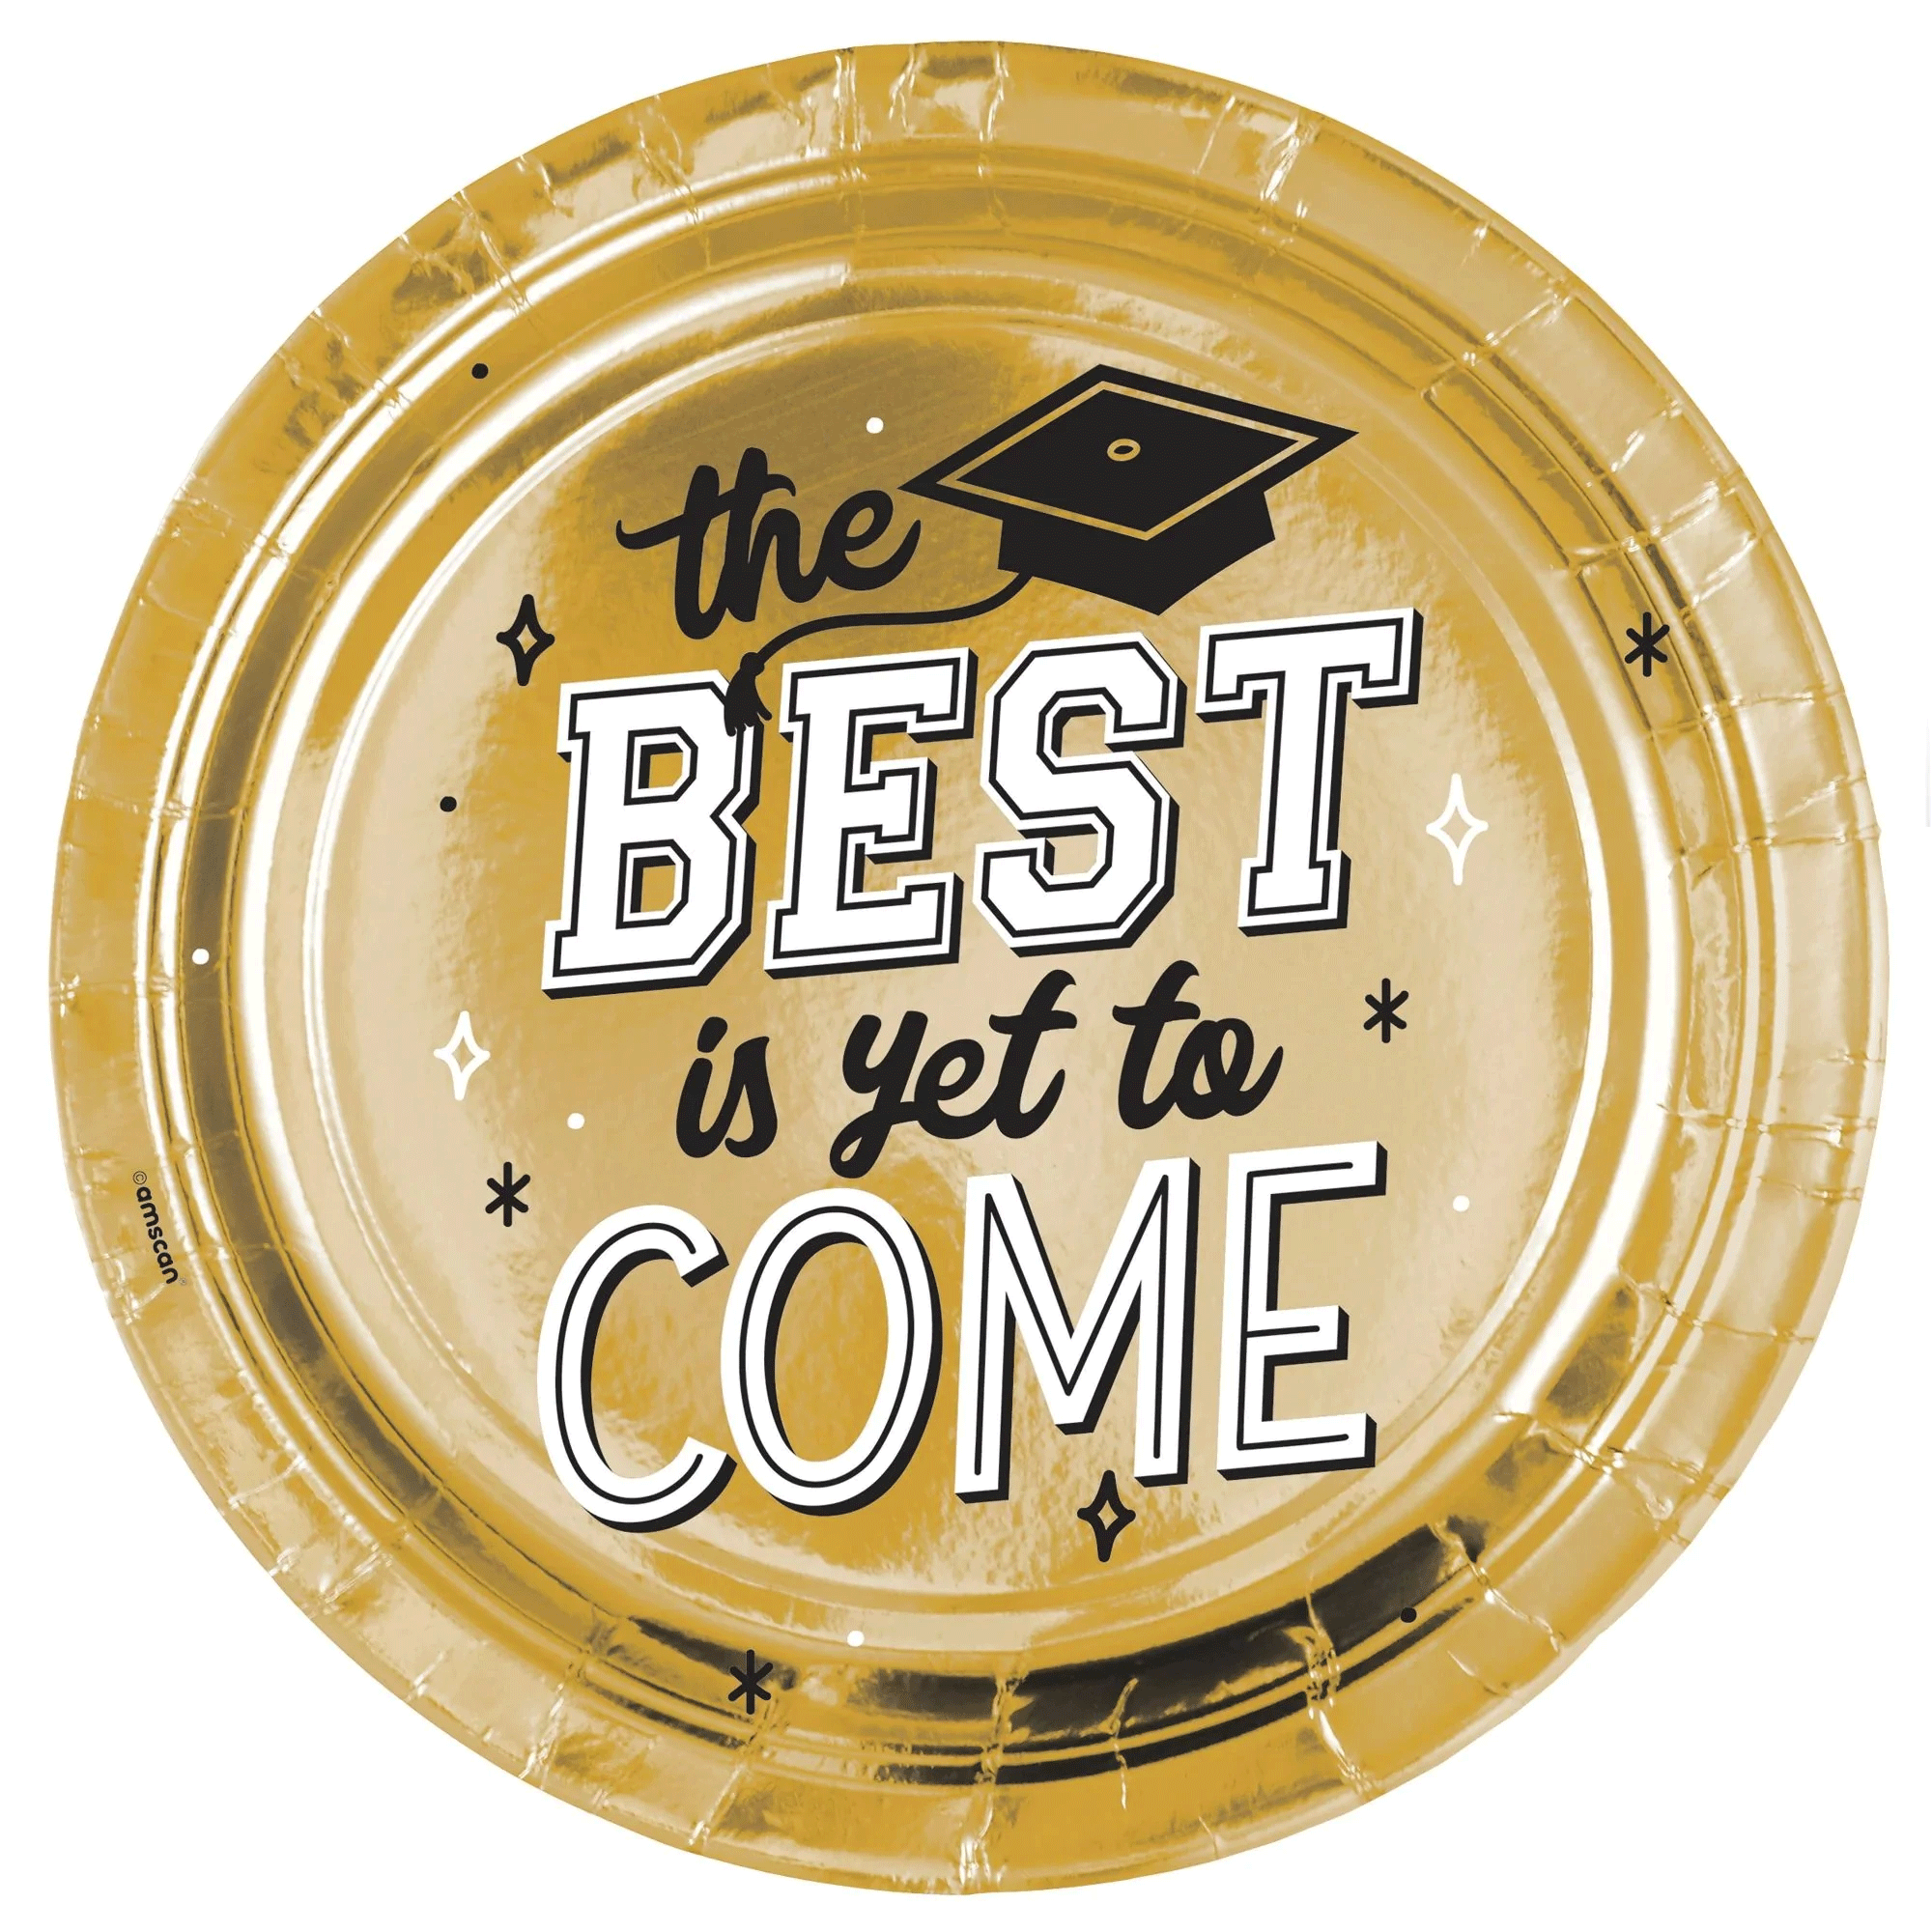 The Best Is Yet To Come Round Metallic Plates 10.5in, 8pcs